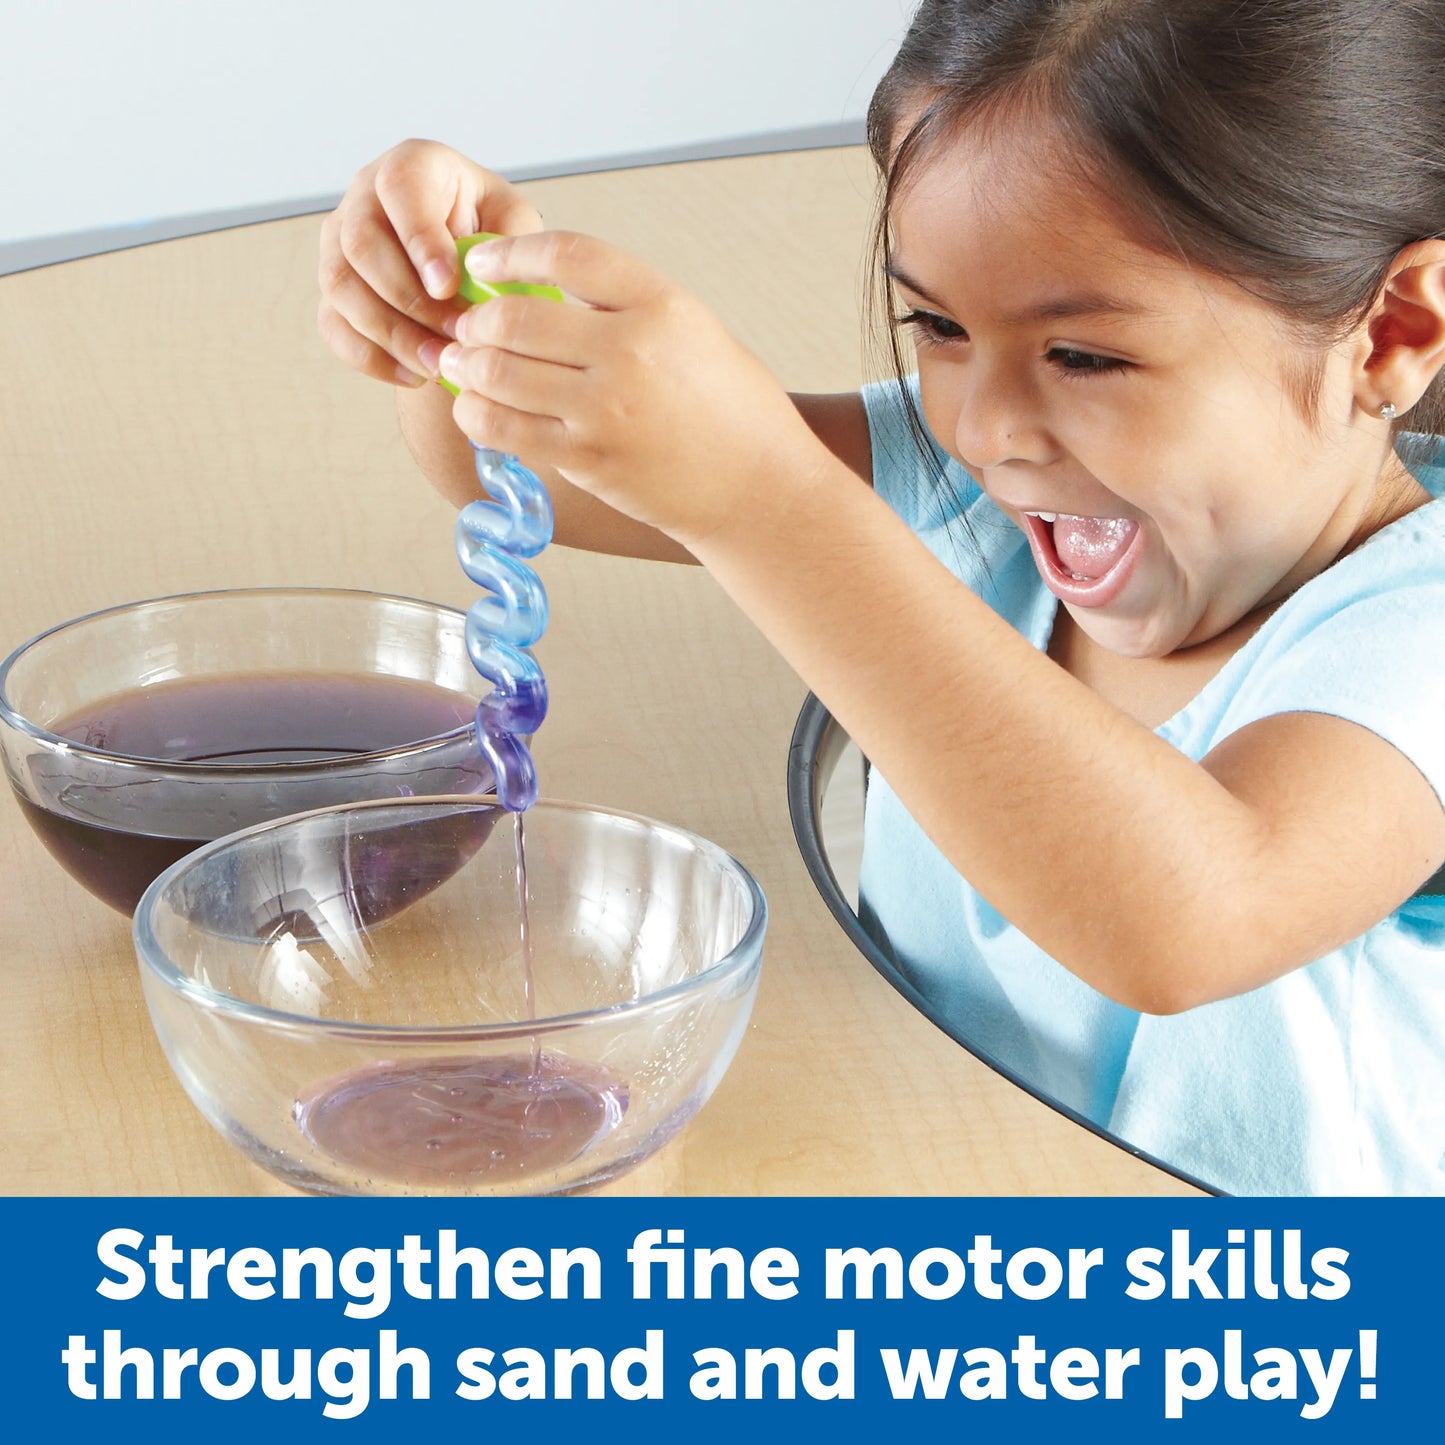 LEARNING RESOURCES - SAND & WATER FINE MOTOR TOOL SET